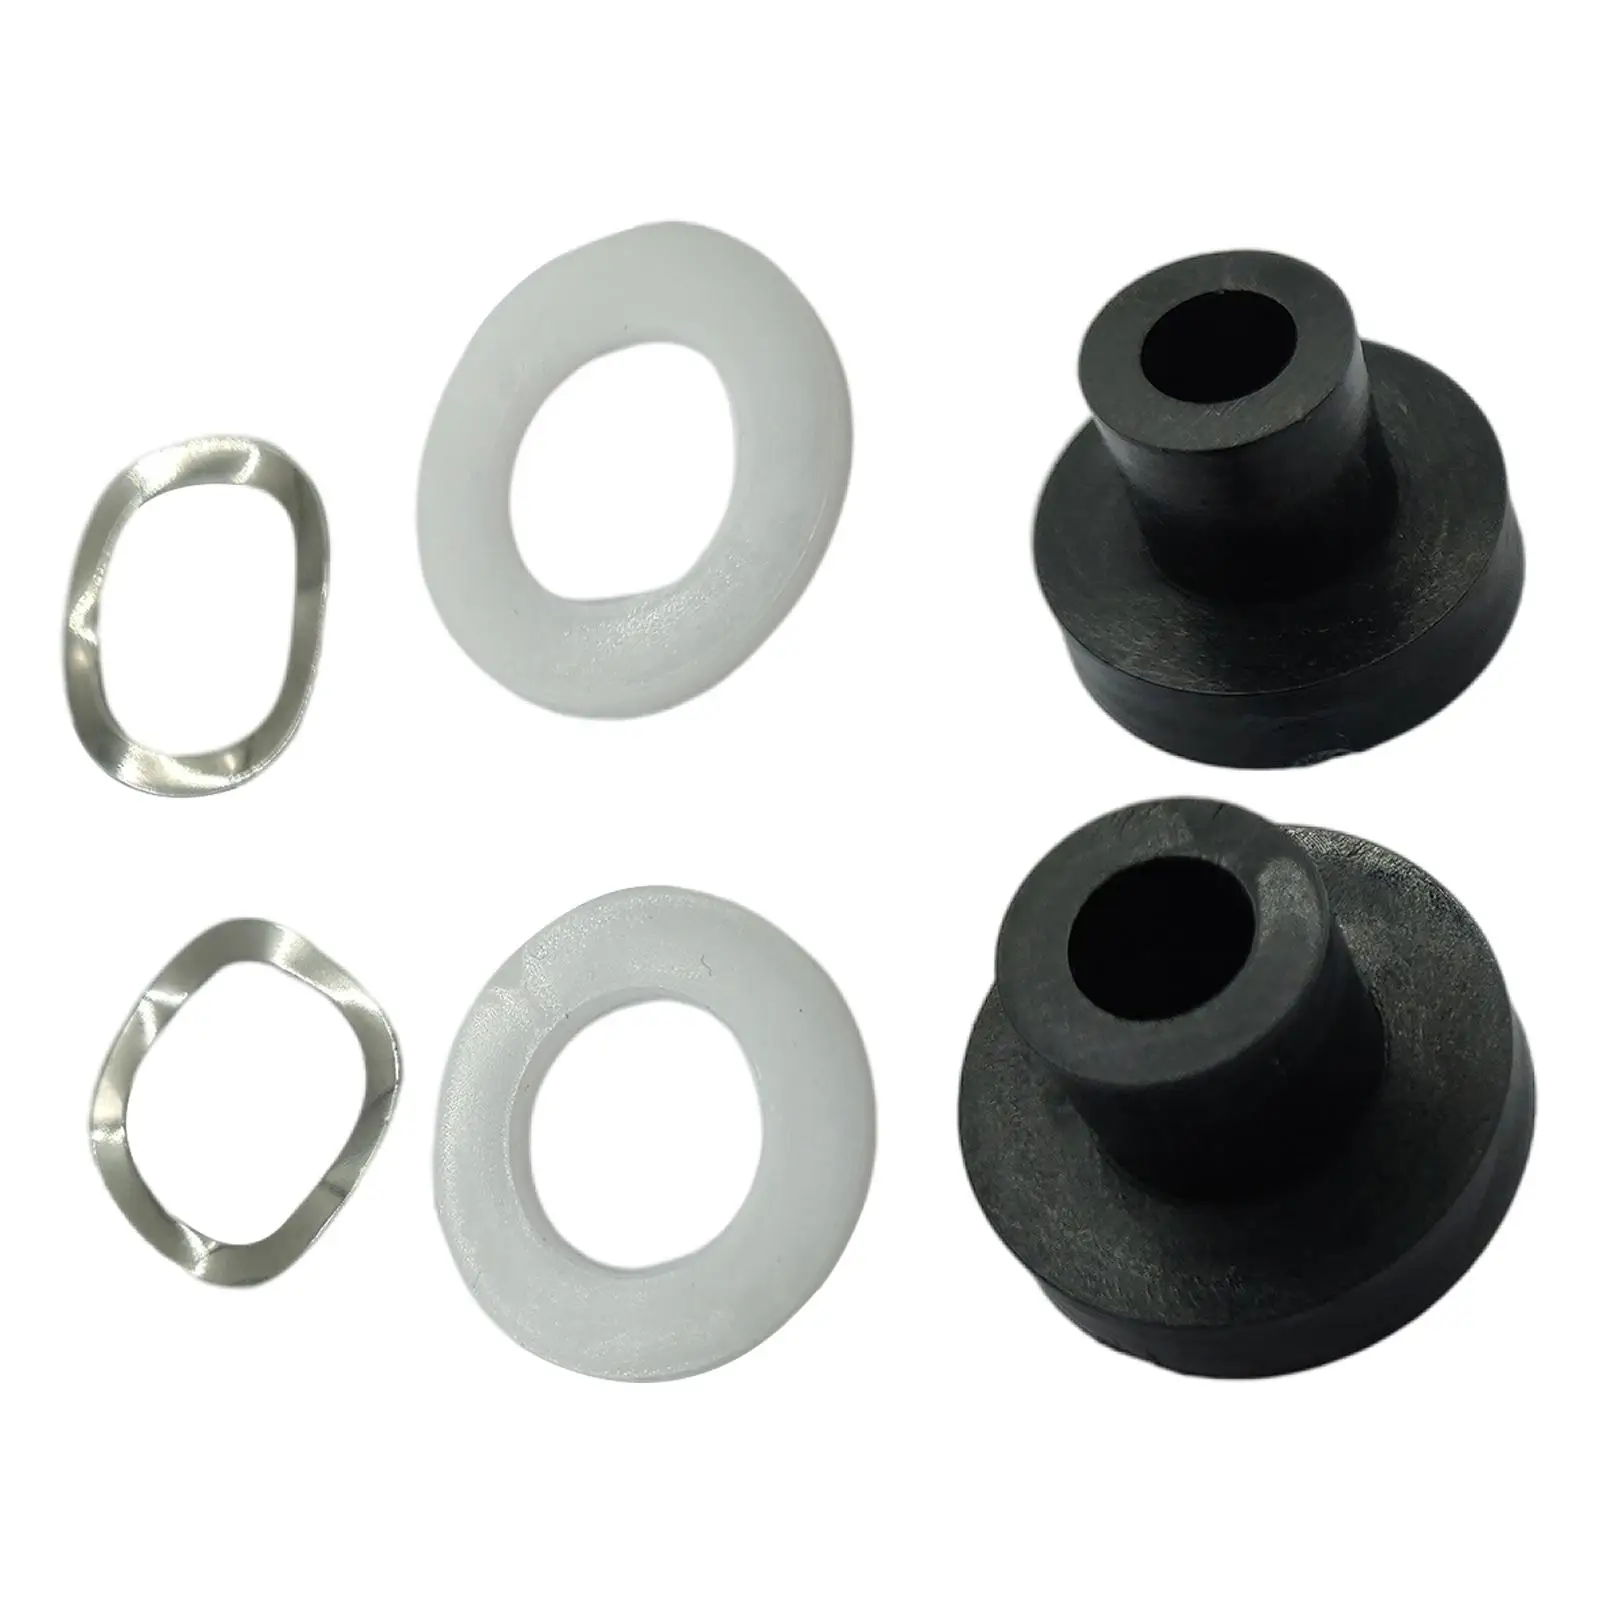 2x Window Bushing 909-925 Direct Replaces for 1990-2005